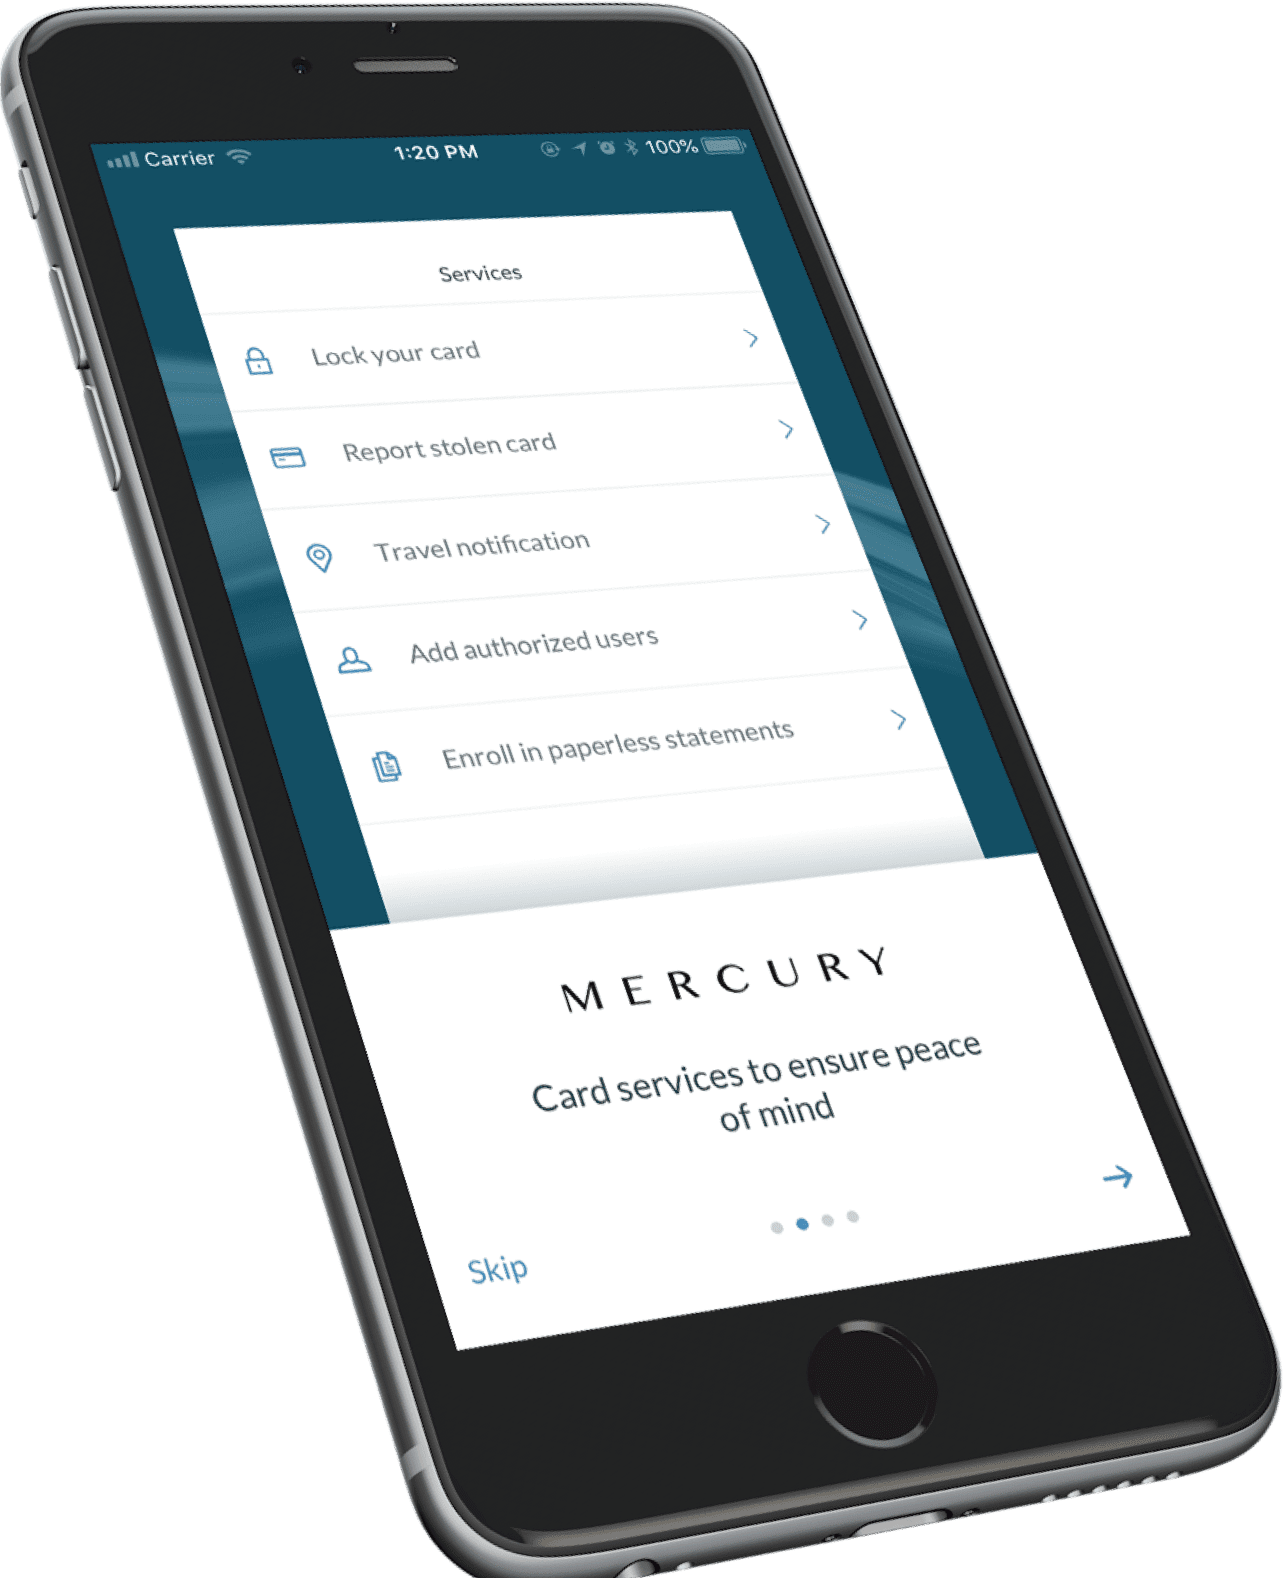 The Credit Shop’s Mercury Cards app shown on a mobile device